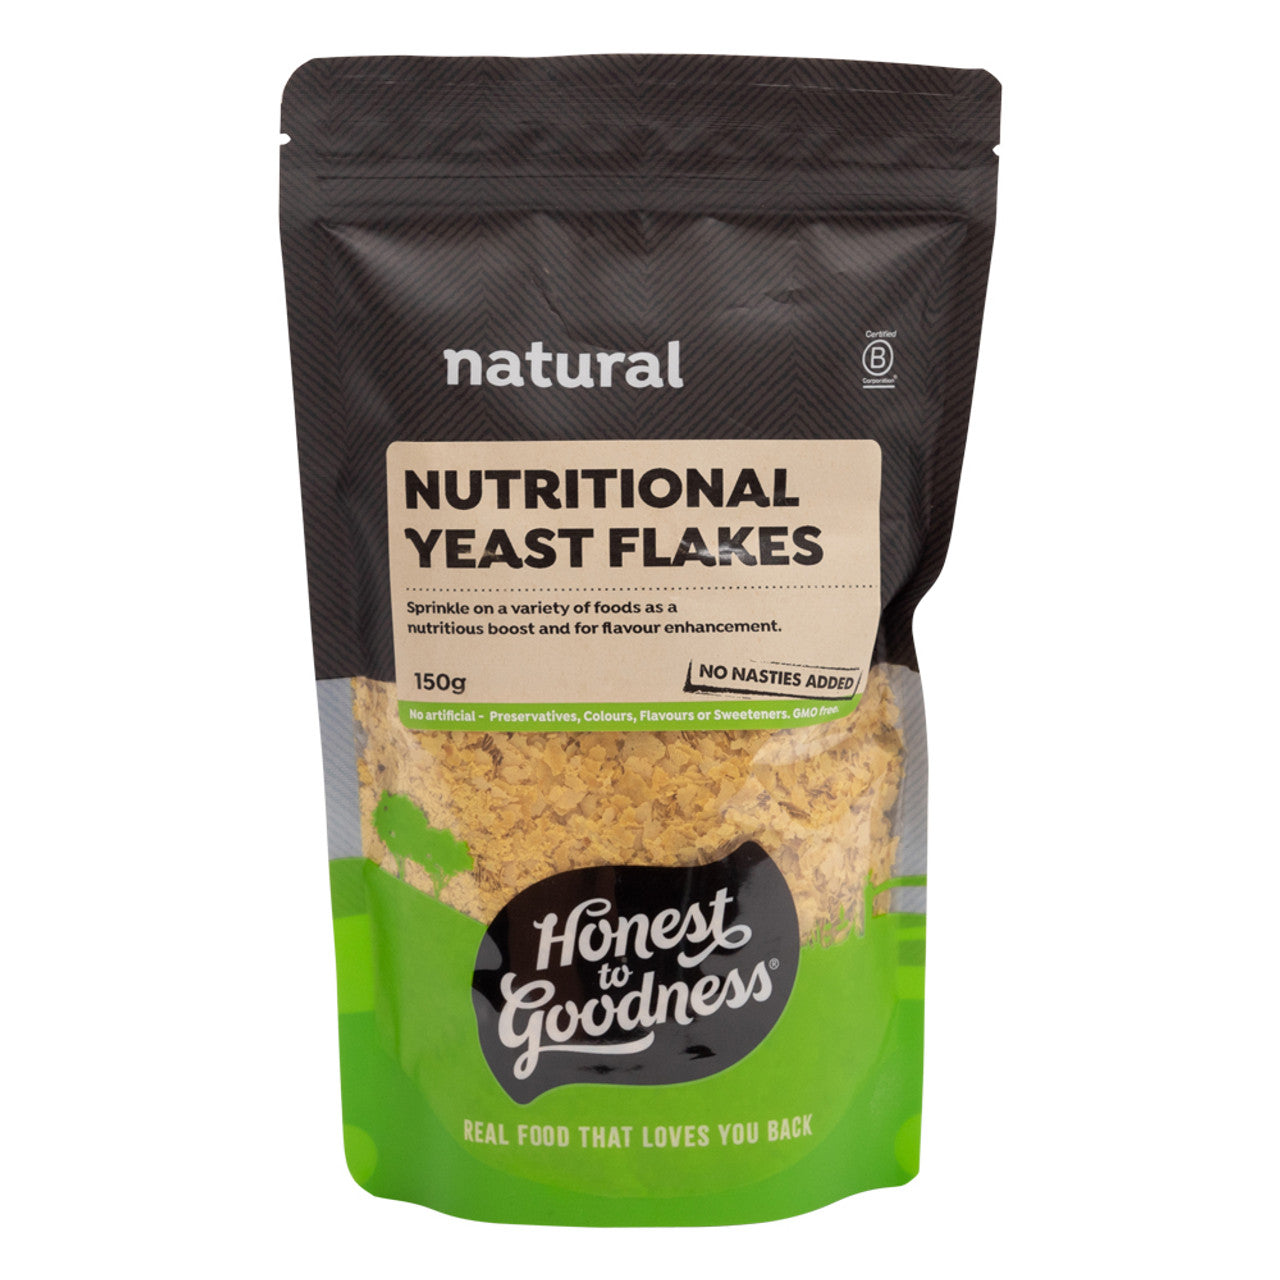 Honest To Goodness Nutritional Yeast Flakes